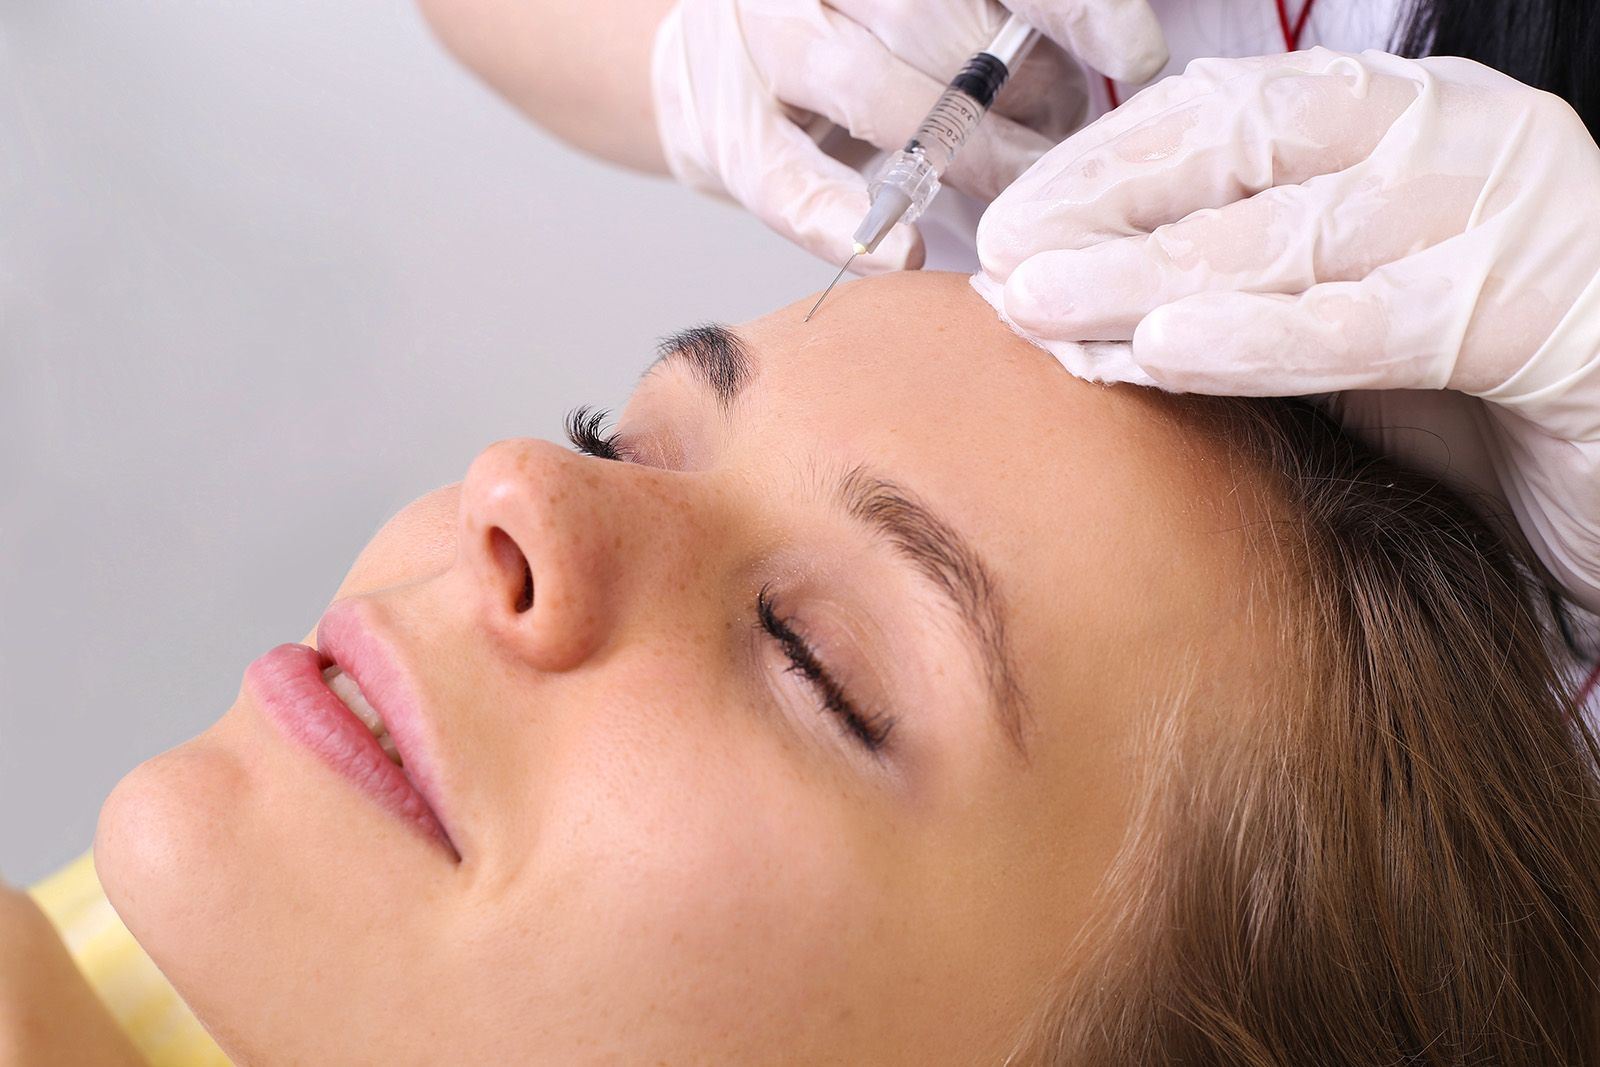 botox-and-injectable-fillers-in-south-edmonton